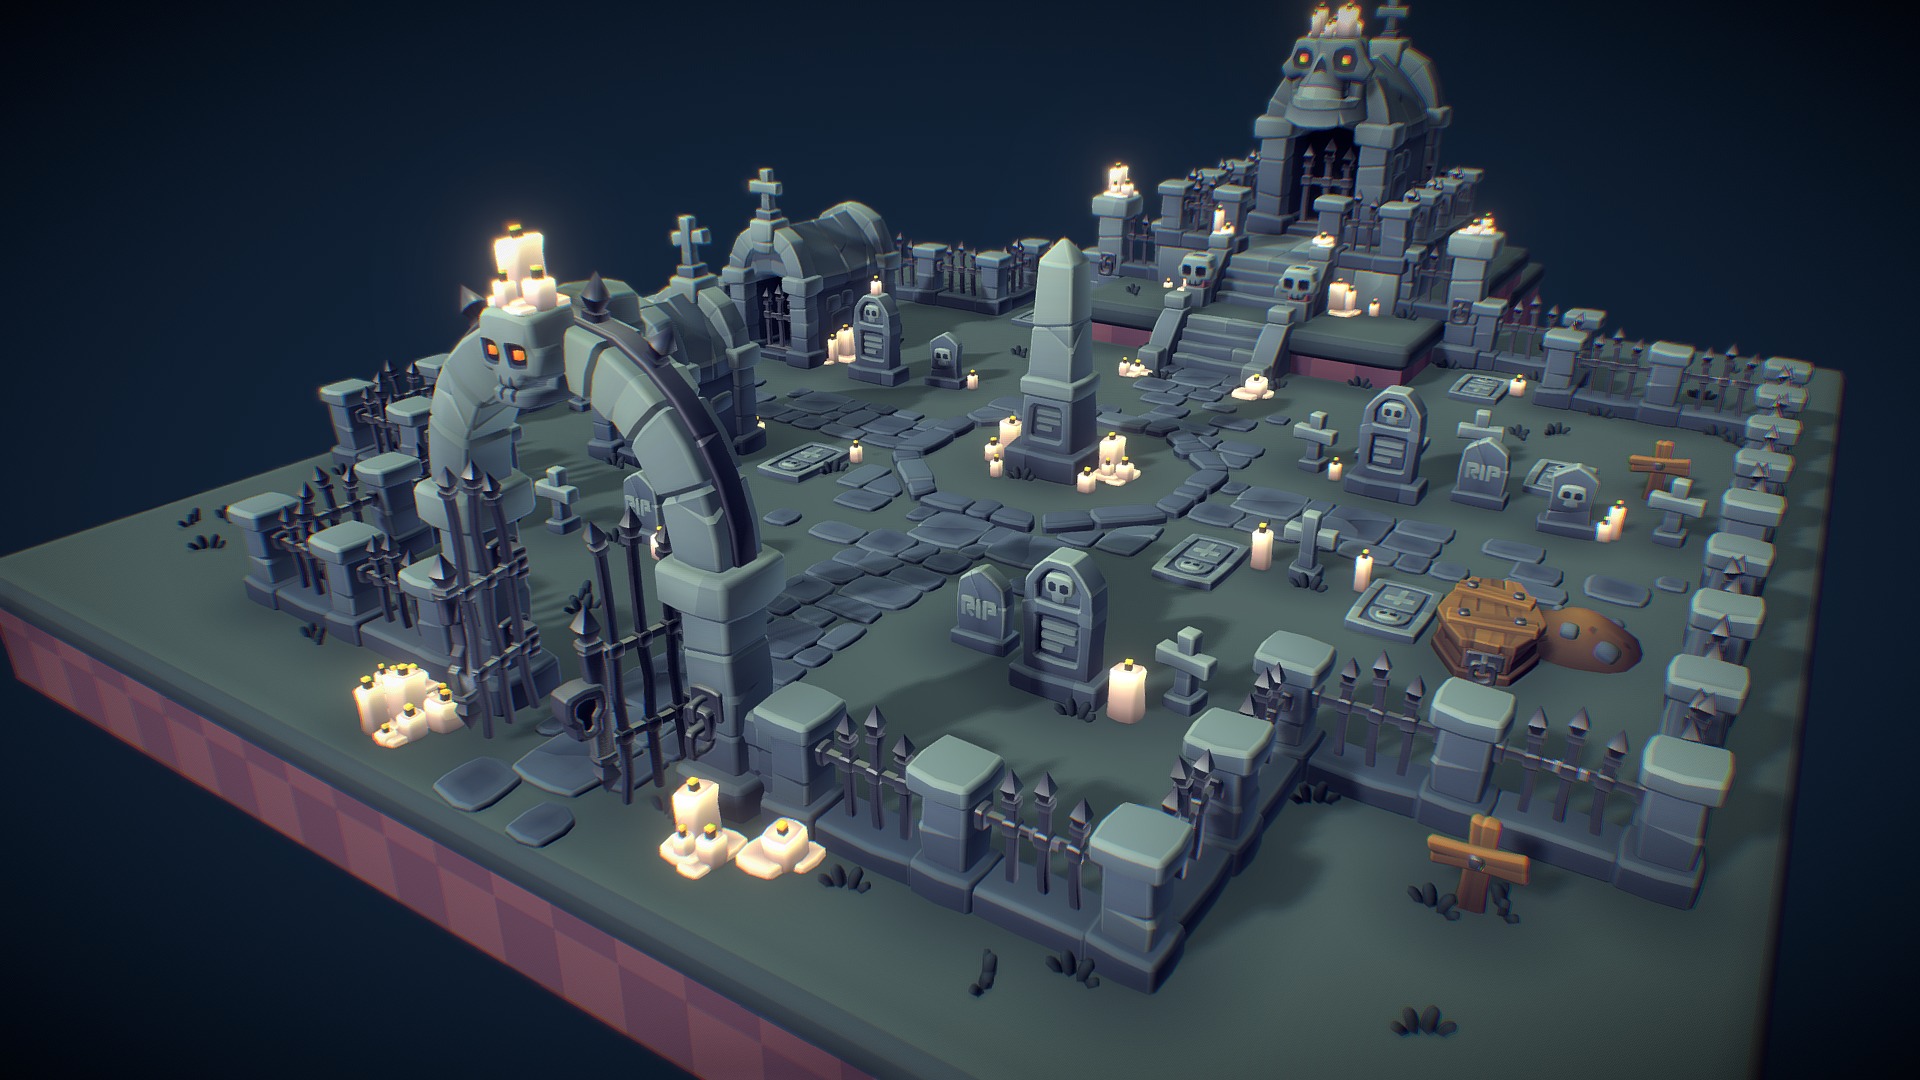 3D model Cemetery Set Update – Proto Series - This is a 3D model of the Cemetery Set Update - Proto Series. The 3D model is about a group of candles on a table.